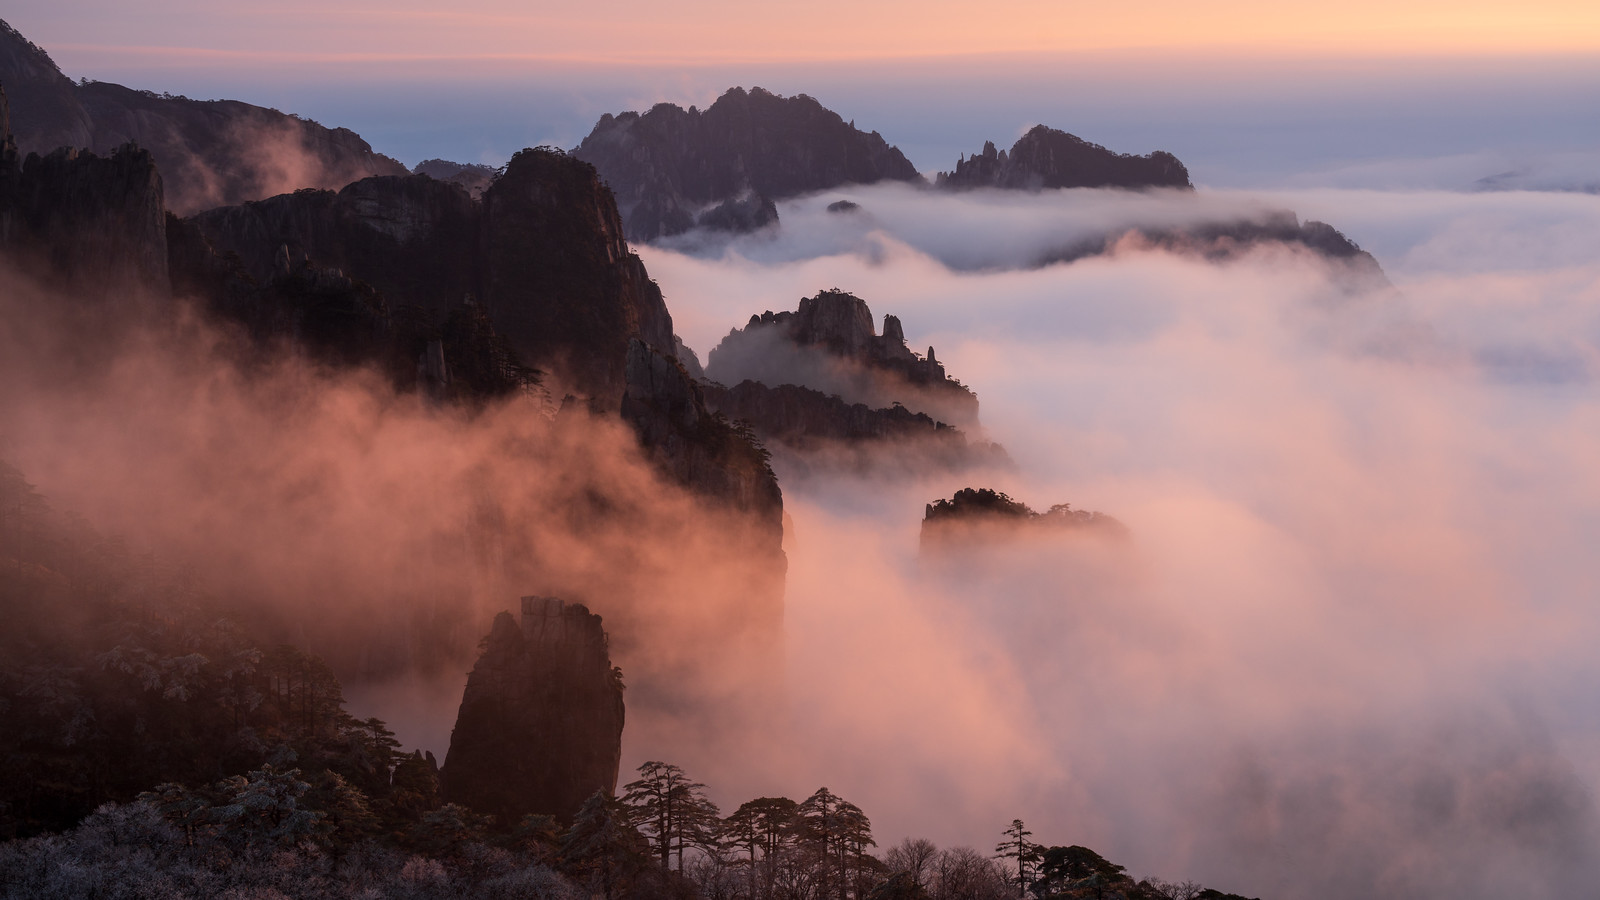 Mt Huangshan at Sunset by Alex Berger